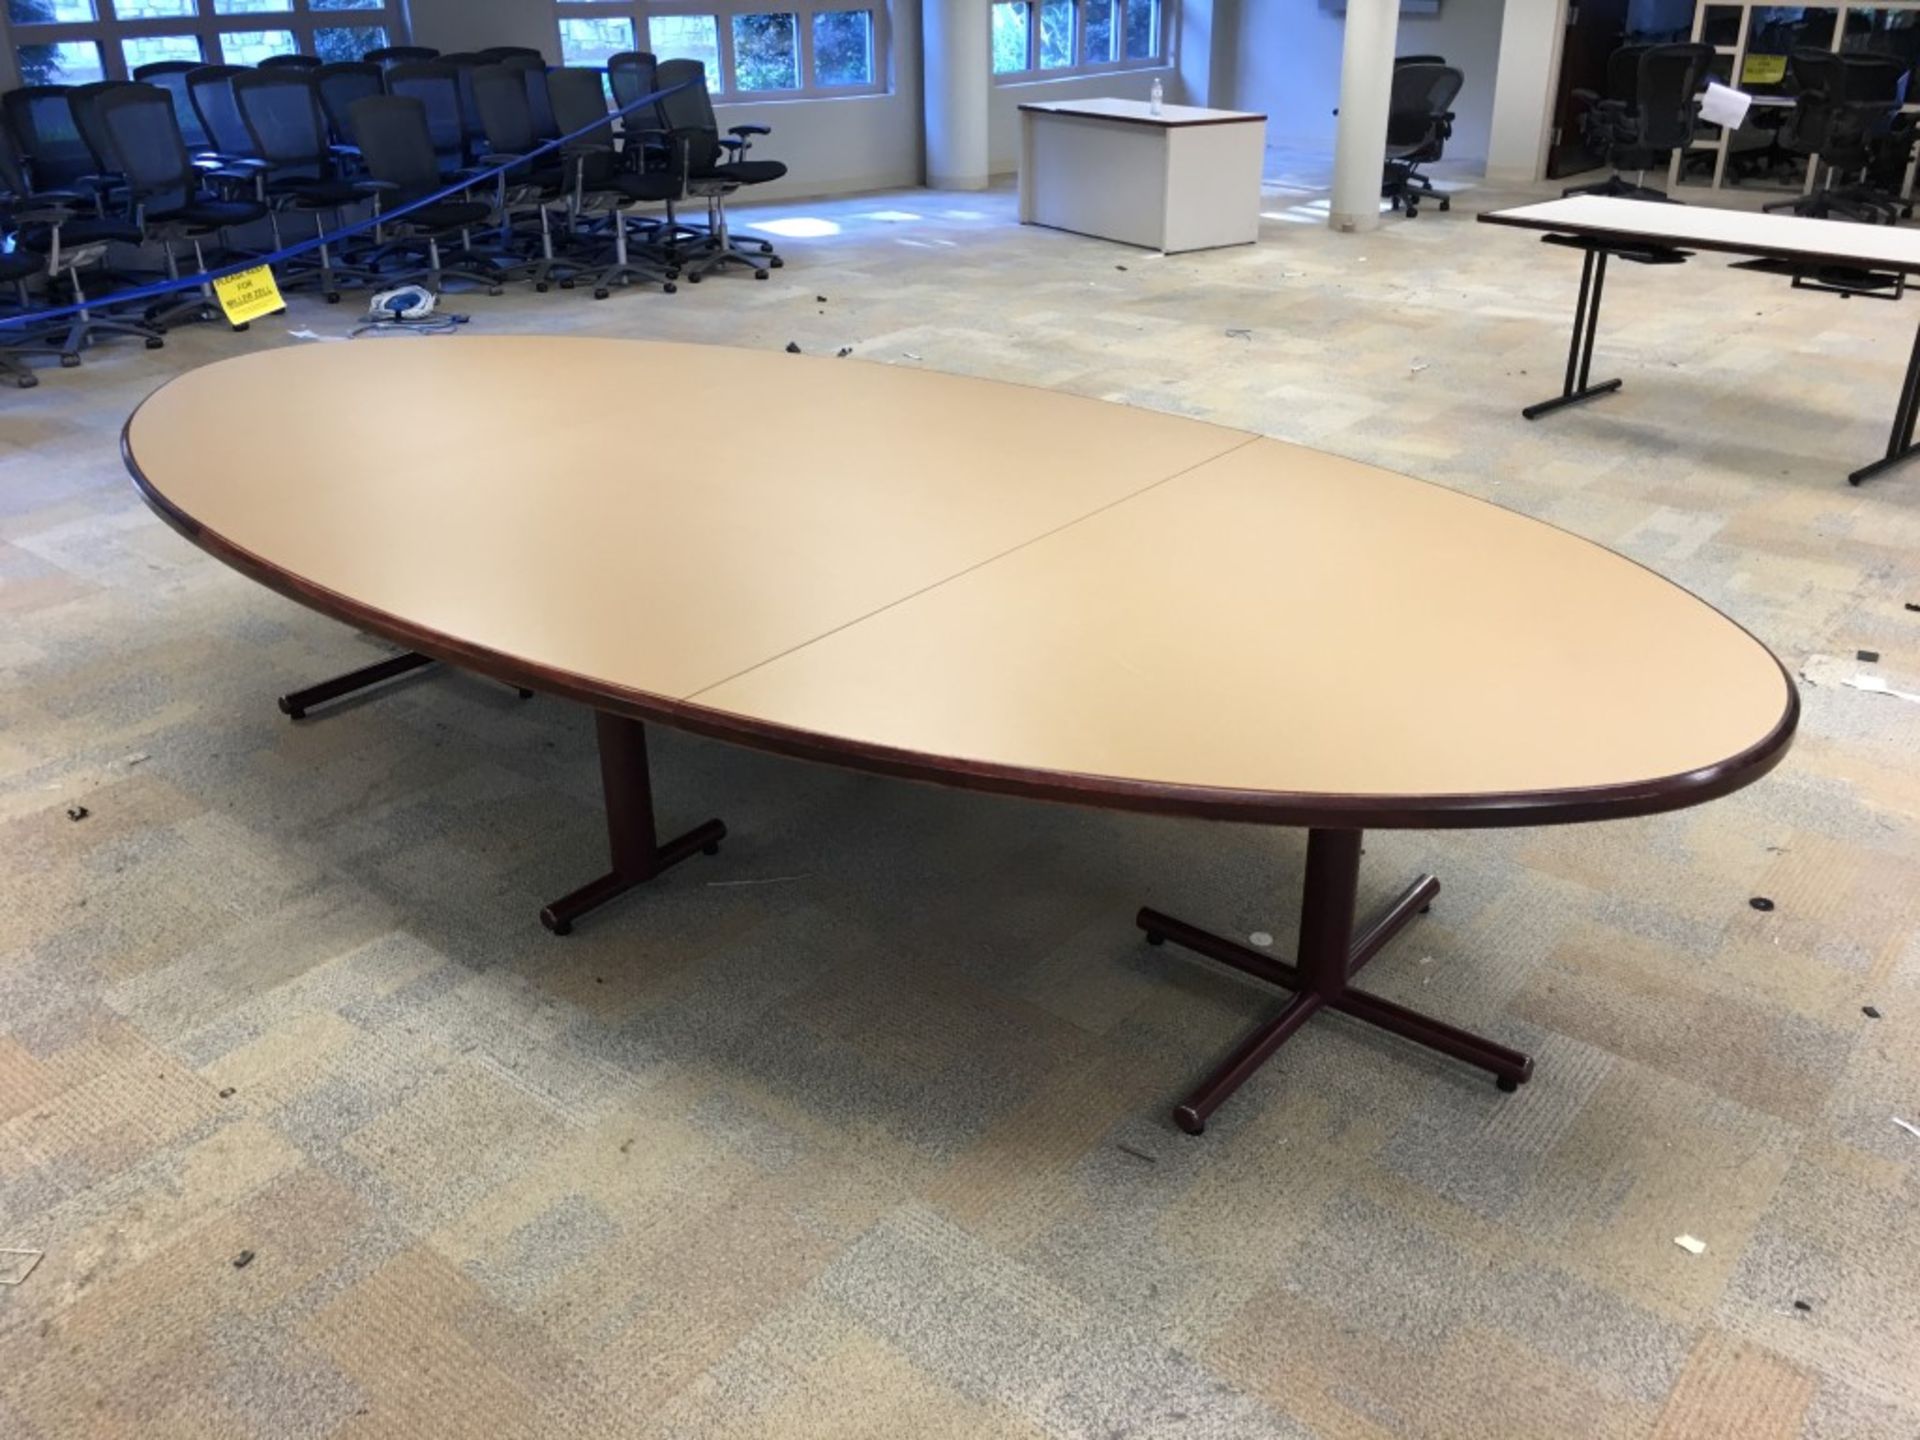 150" X 72" CONFERENCE TABLE WITH 8 PCS OF KNOLL EXECUTIVE CHAIRS - Image 8 of 8